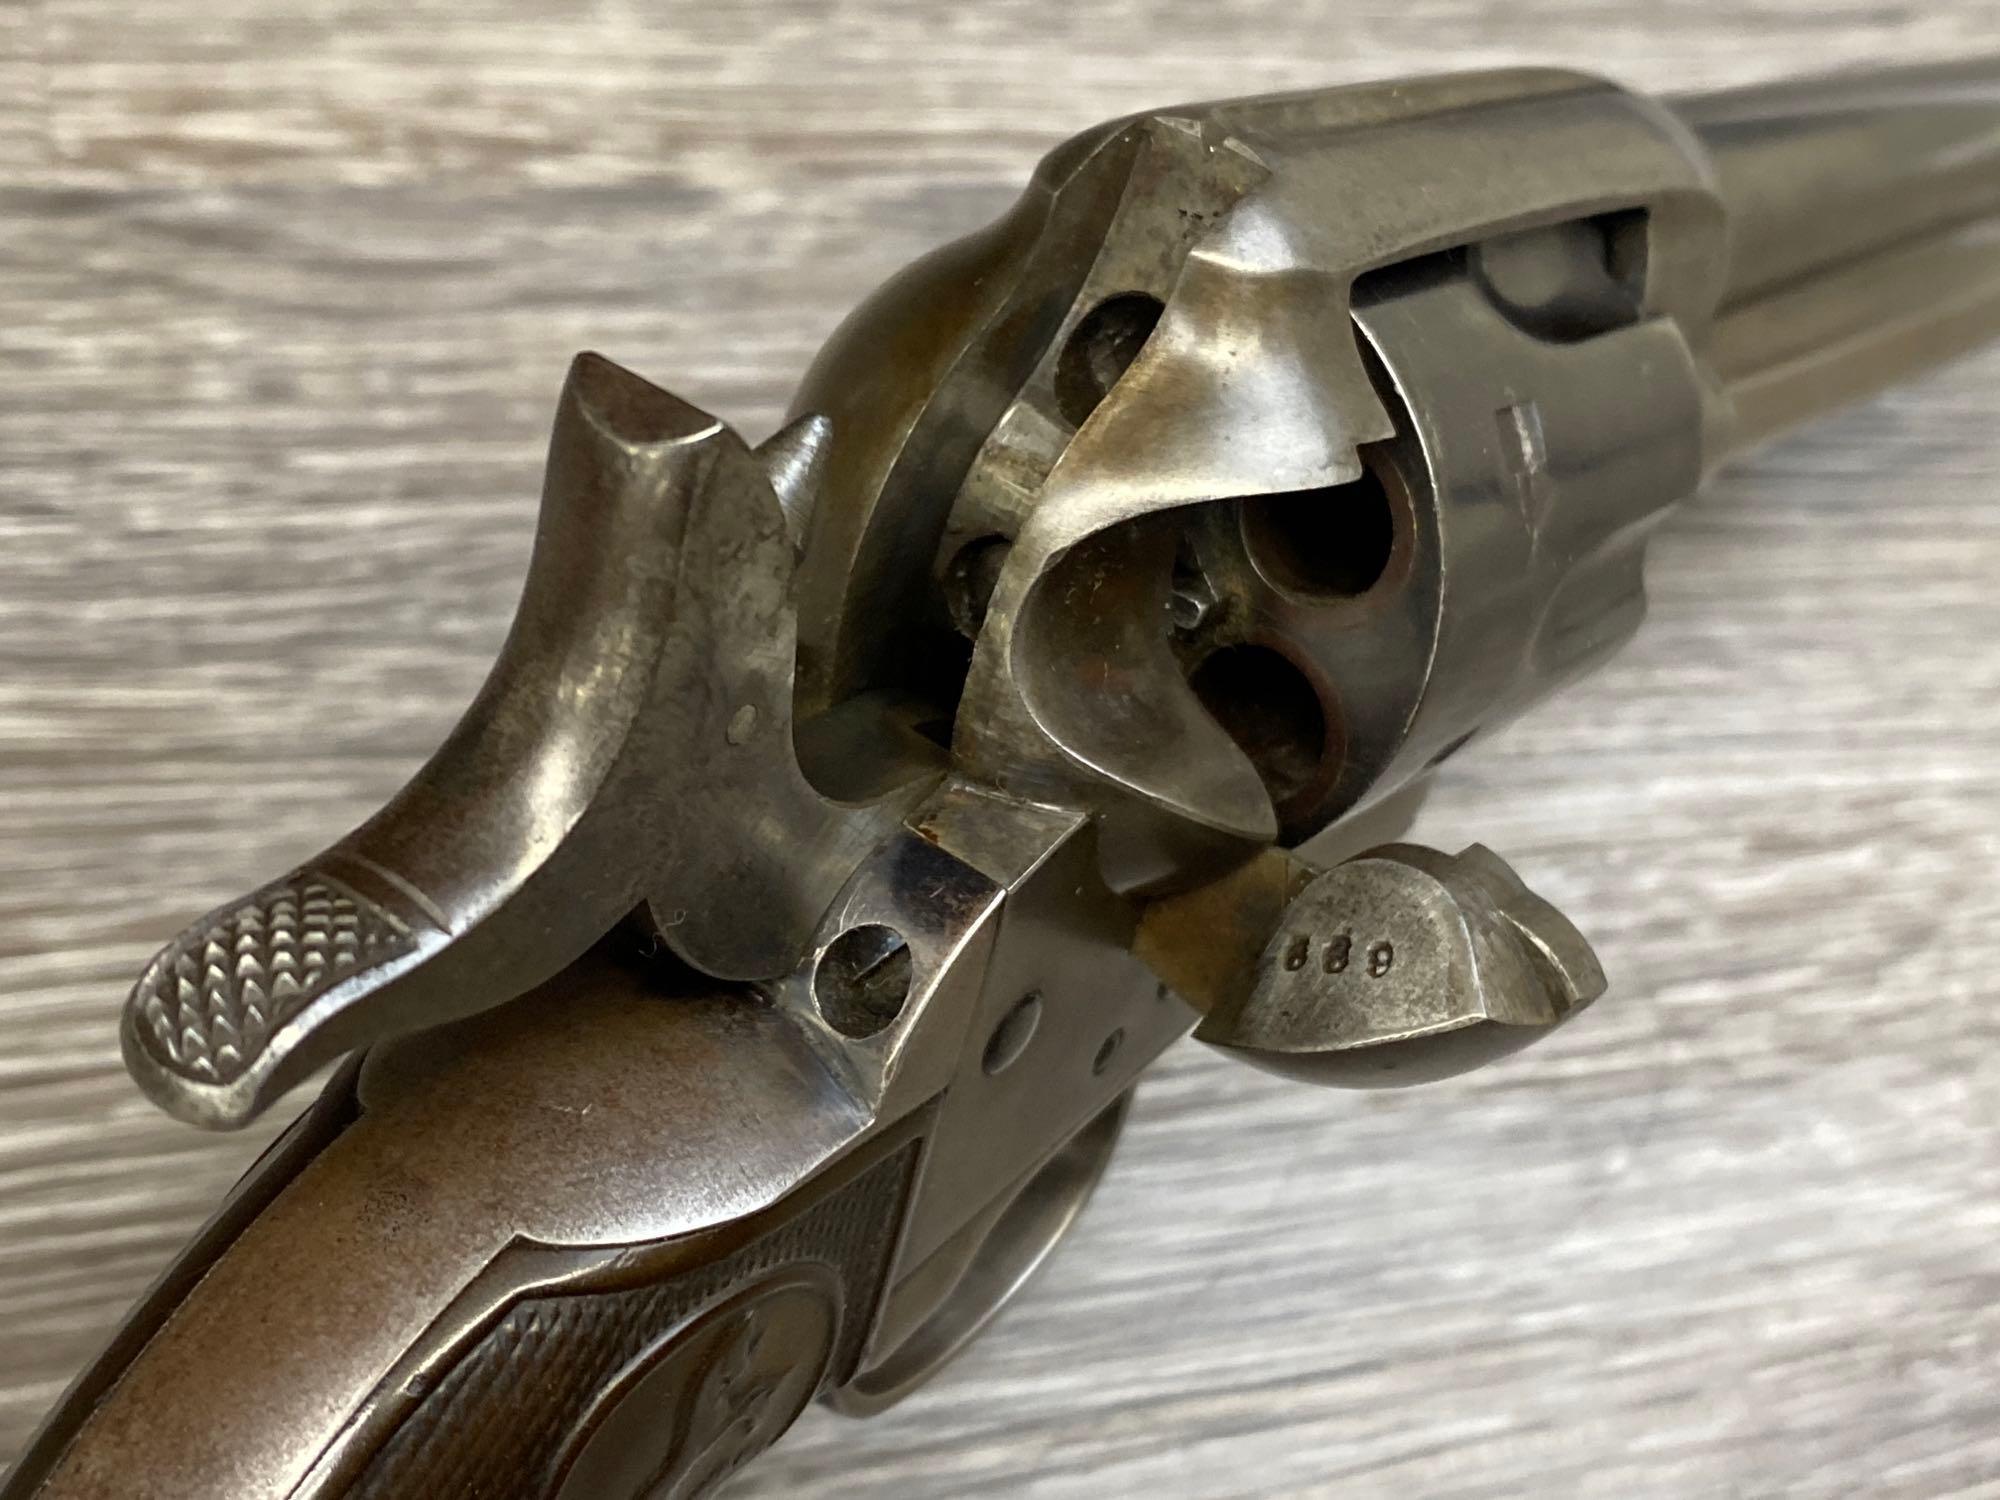 1st GENERATION COLT SINGLE ACTION ARMY REVOLVER .38 WCF CAL. (MFG 1899).